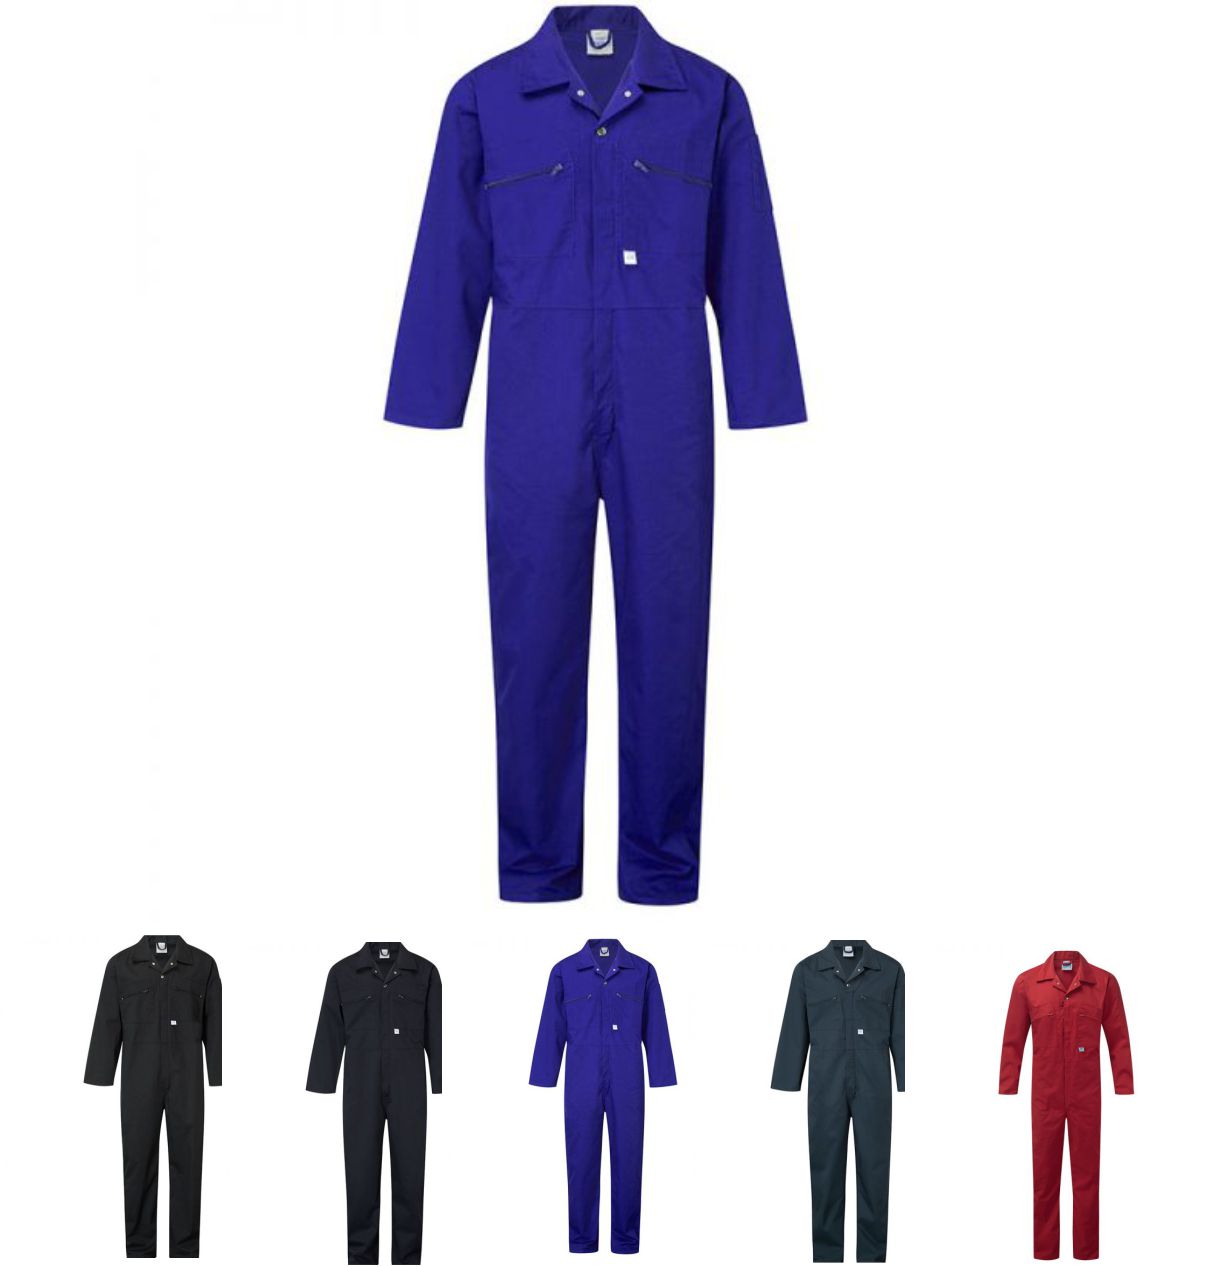 Fort 366 Zip Front Coverall